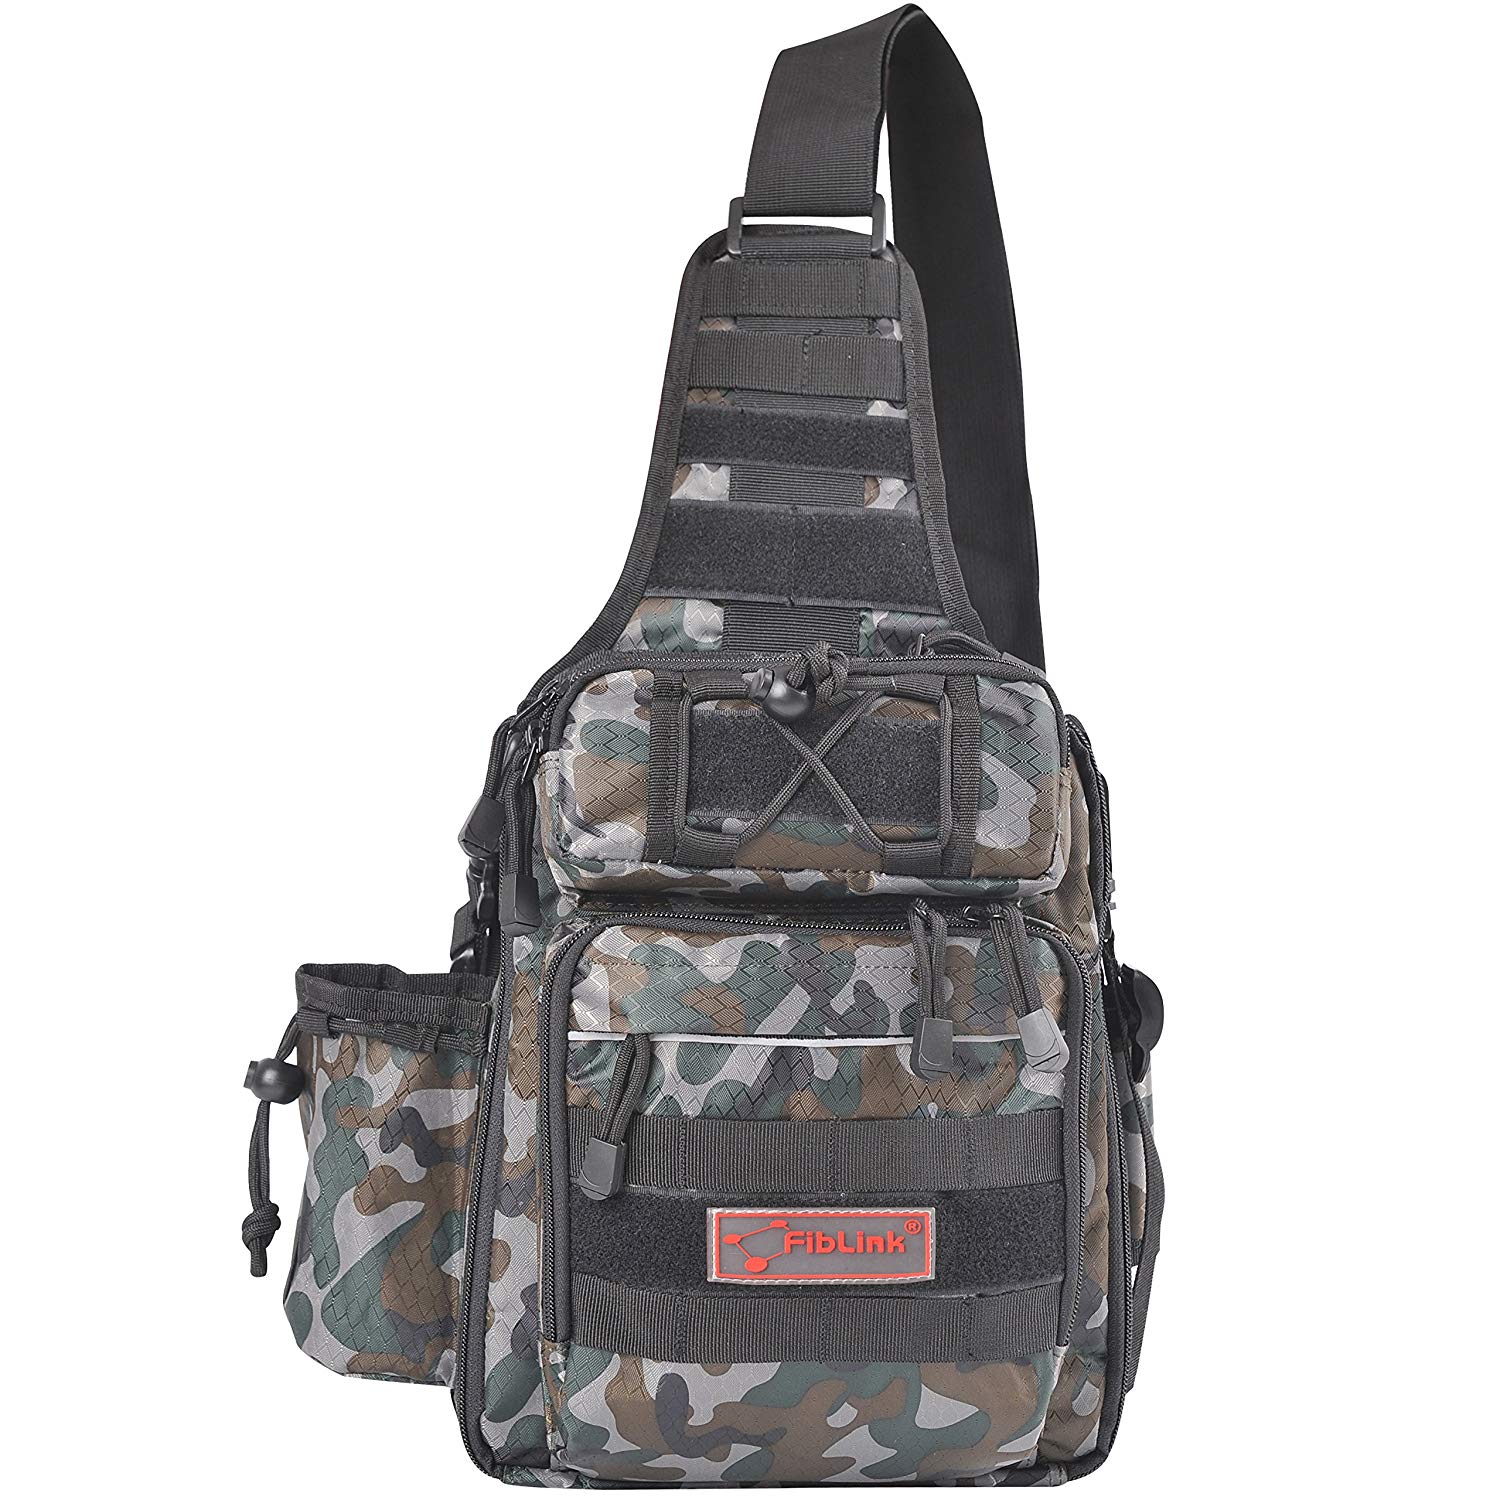 fishing sling pack, fishing sling pack Suppliers and Manufacturers at